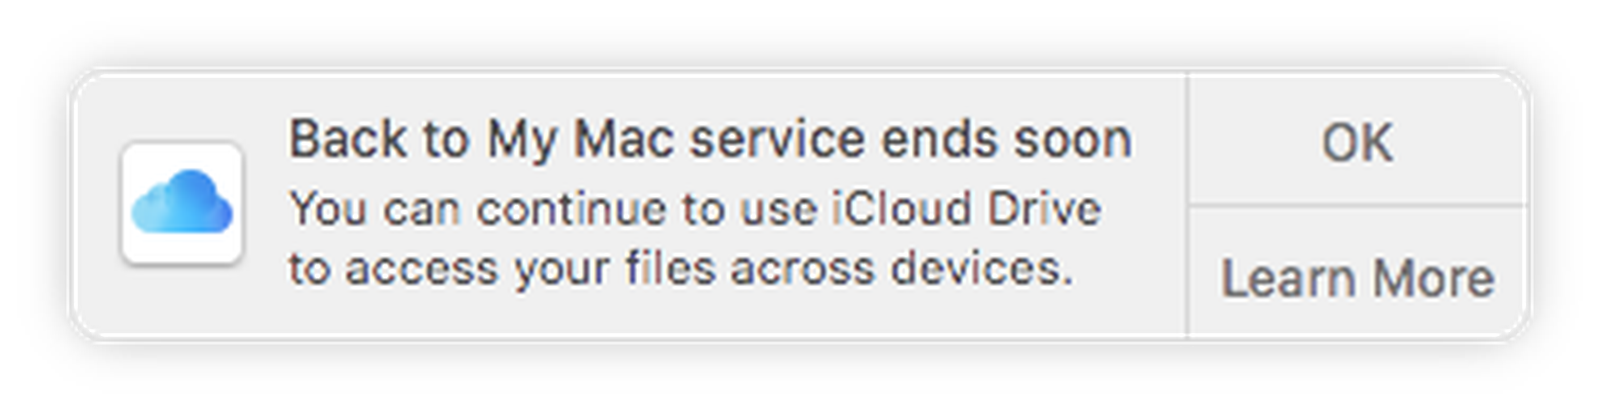 what is back to my mac icloud